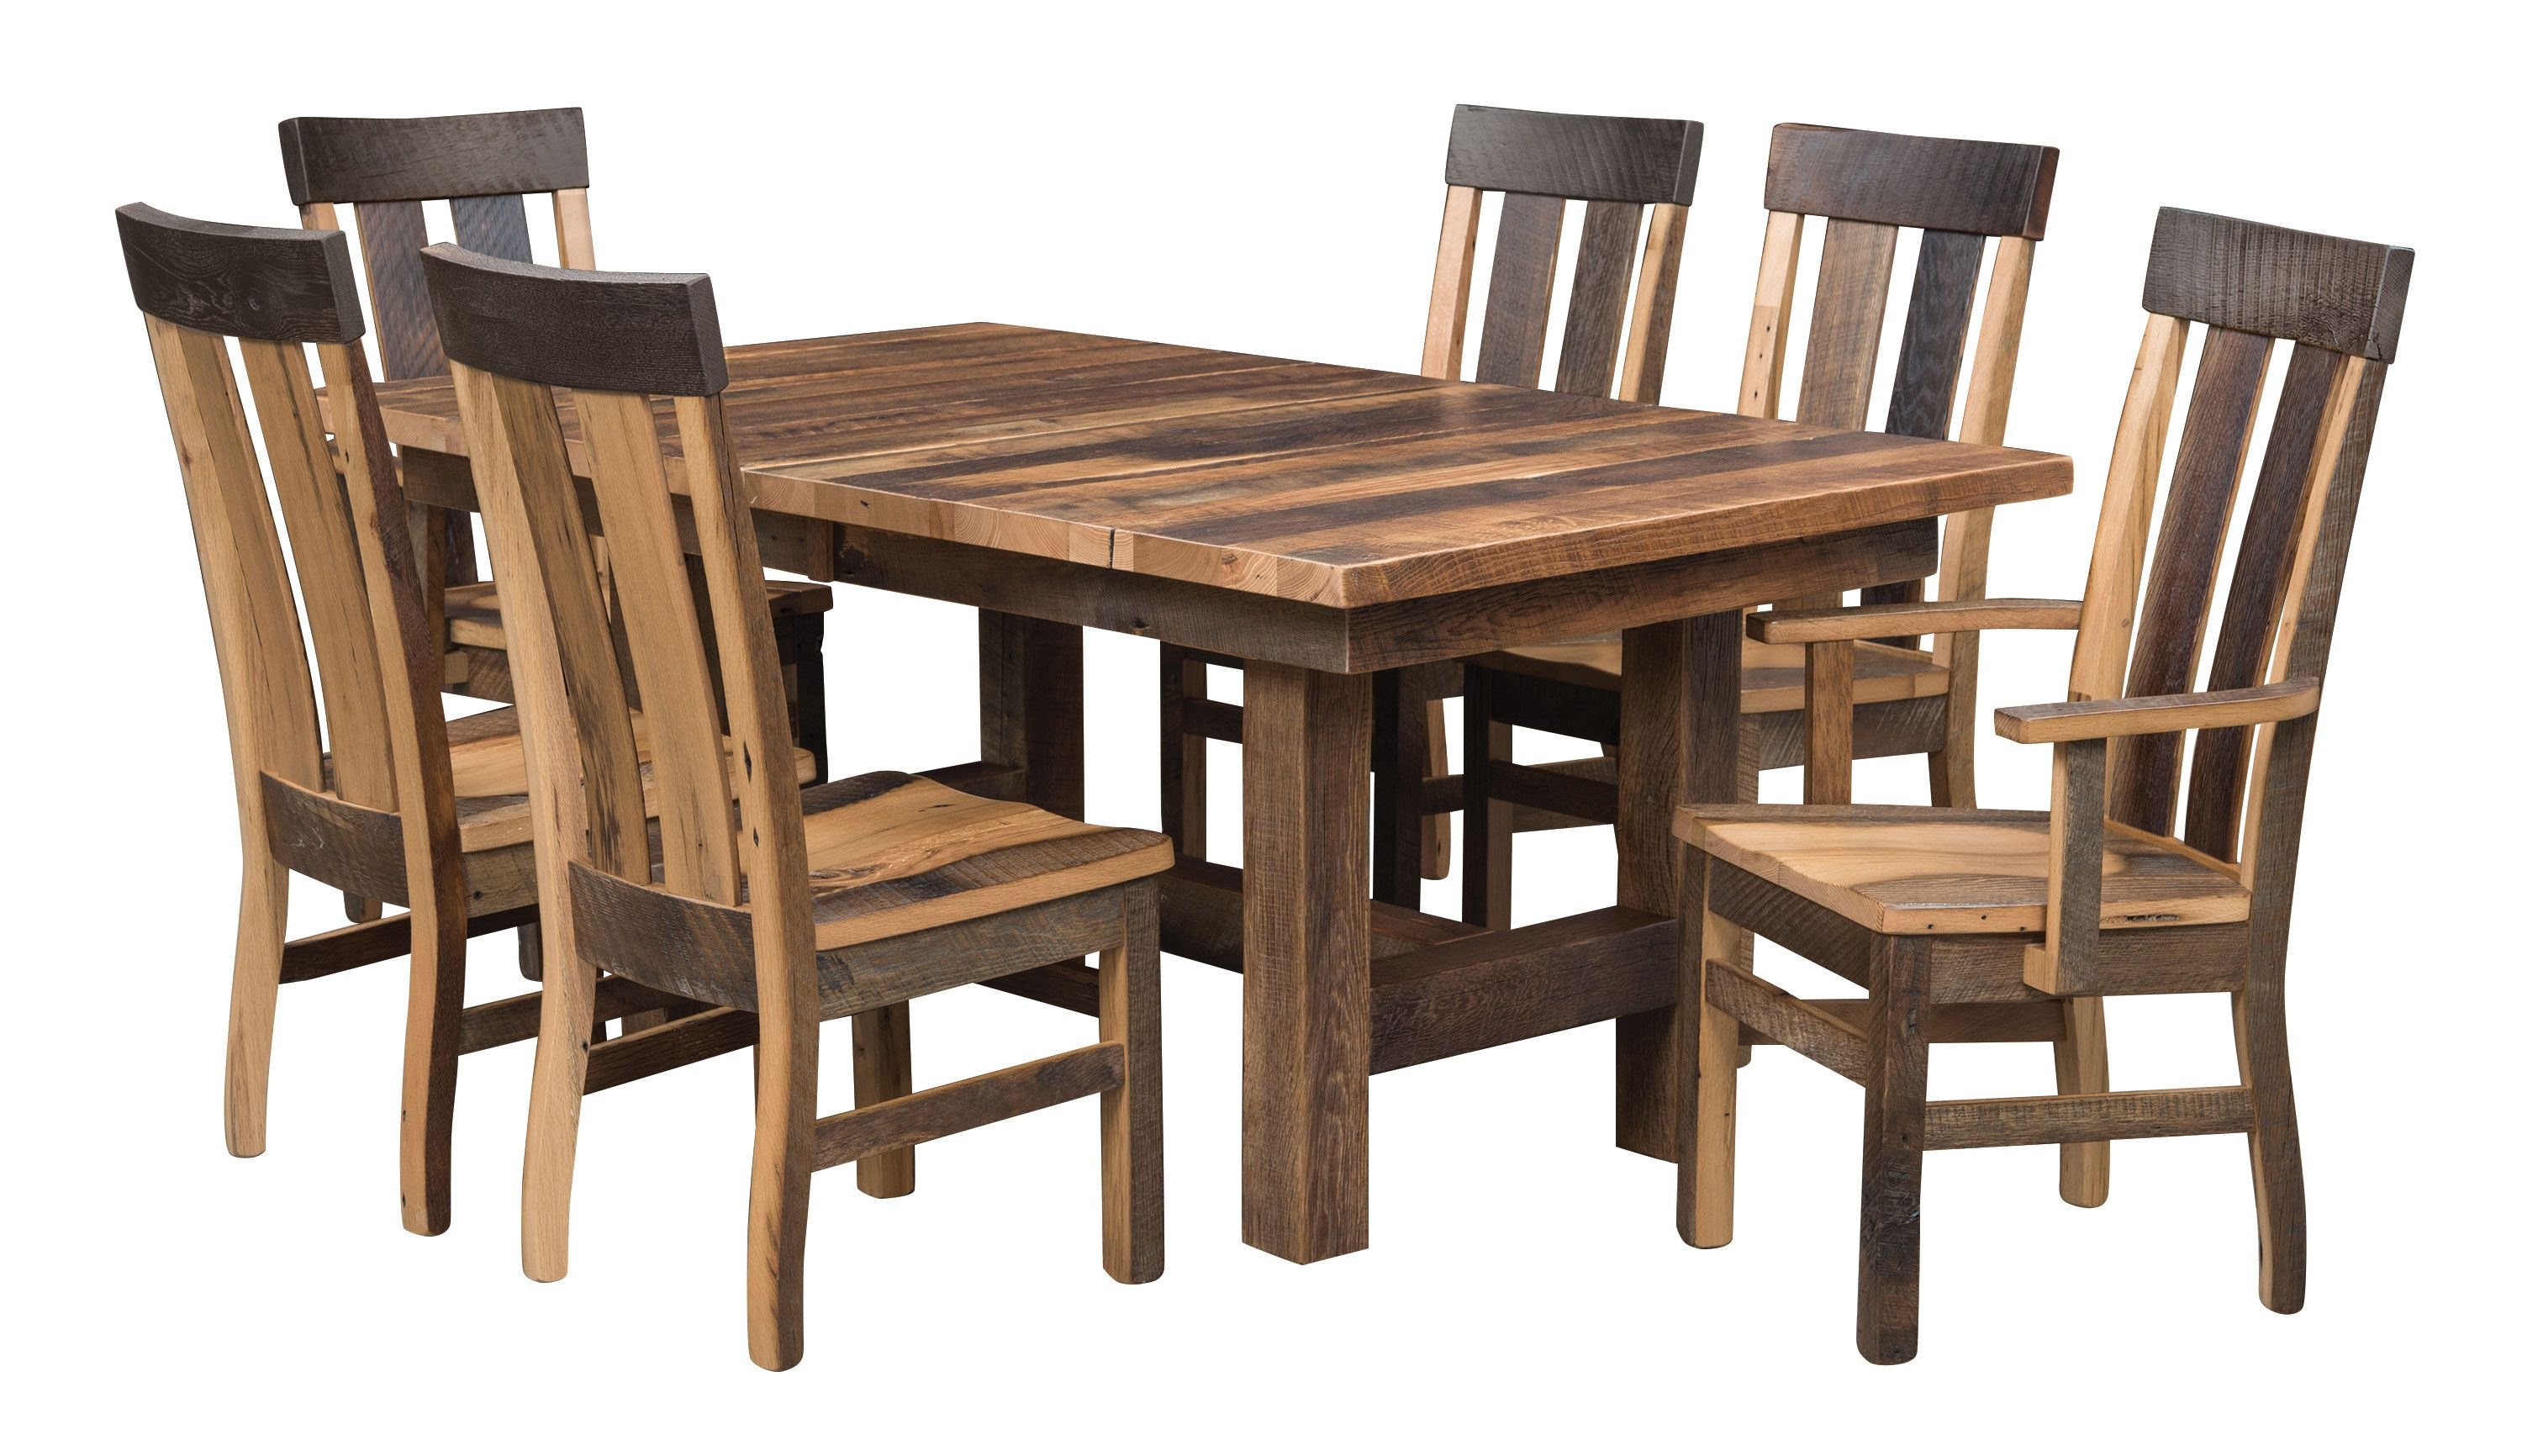 Glazier Reclaimed Barnwood Dining Furniture Collection